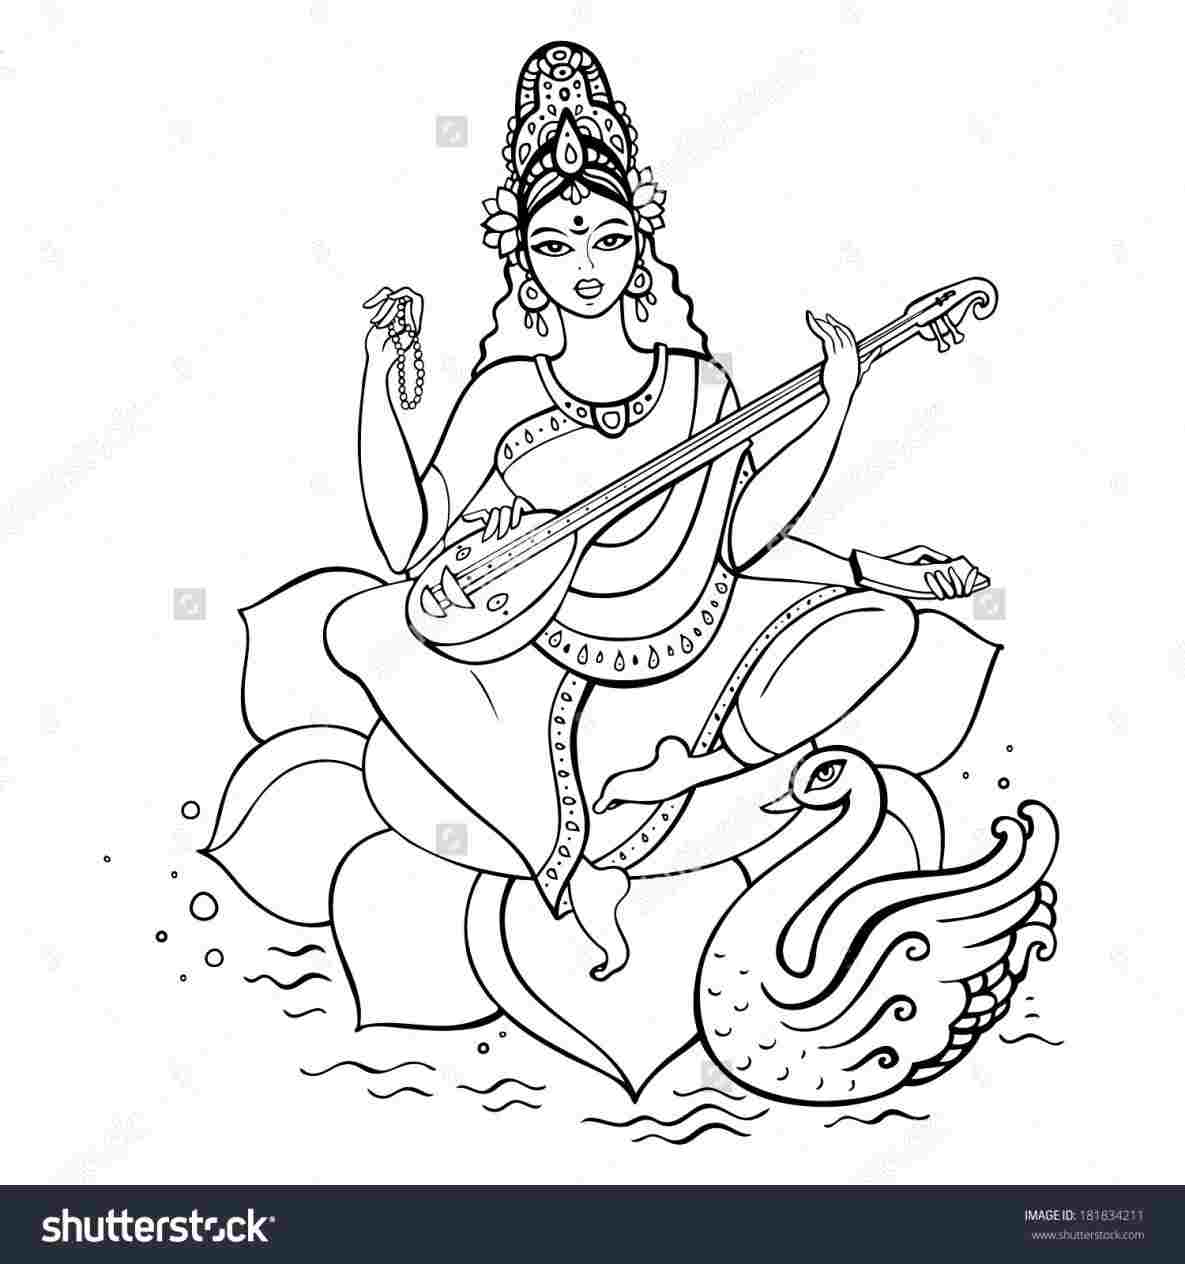 Saraswati Coloring Pages Images Coloring Pages Pinterest Rhpinterestcom How To Draw Saraswati